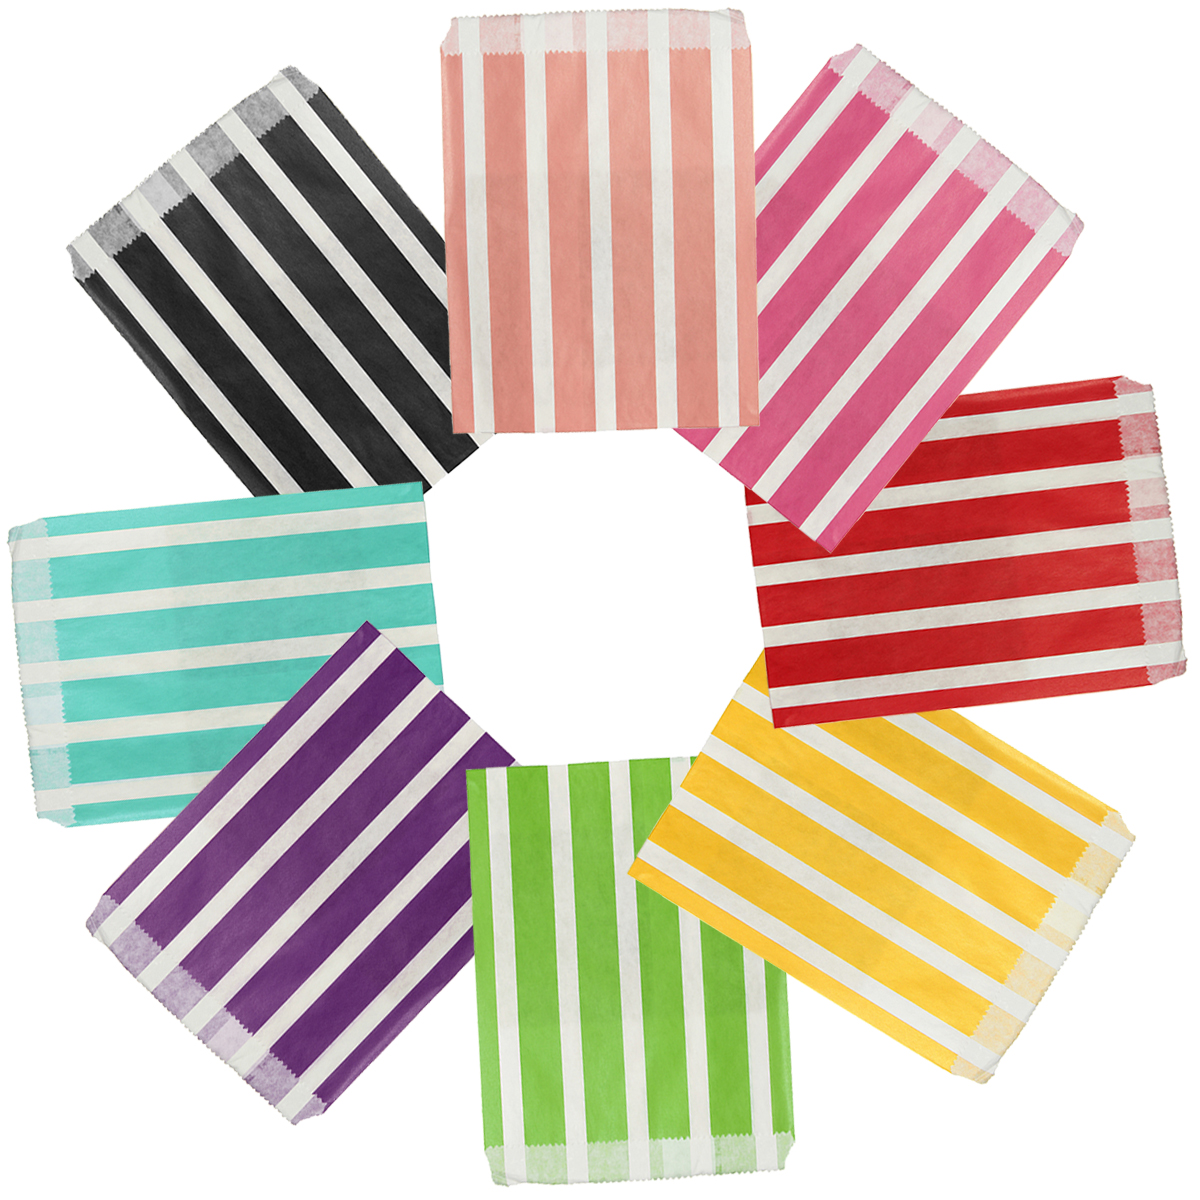 25pcs Biodegrable Retro Stripe Candy Sweet Gift Bag Wedding Party Paper Food Bag